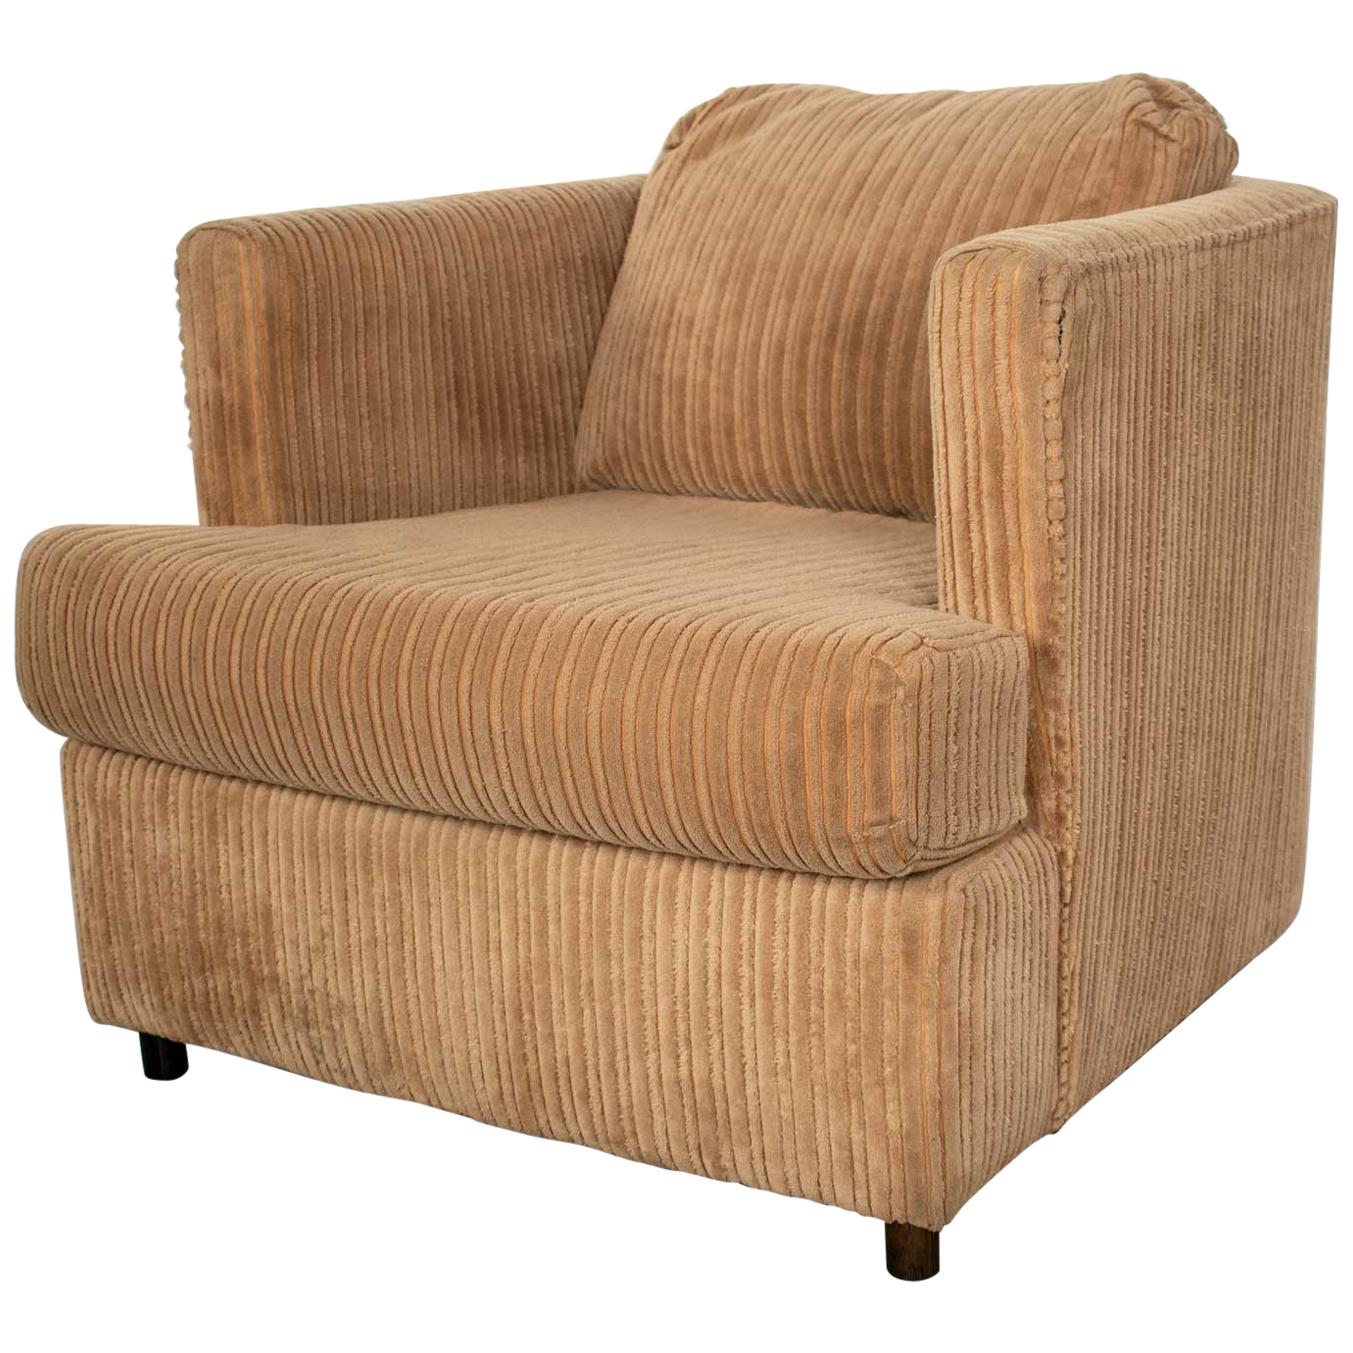 Modern Tub Lounge Chair Camel Colored Wide Wale Corduroy Style Harvey Probber